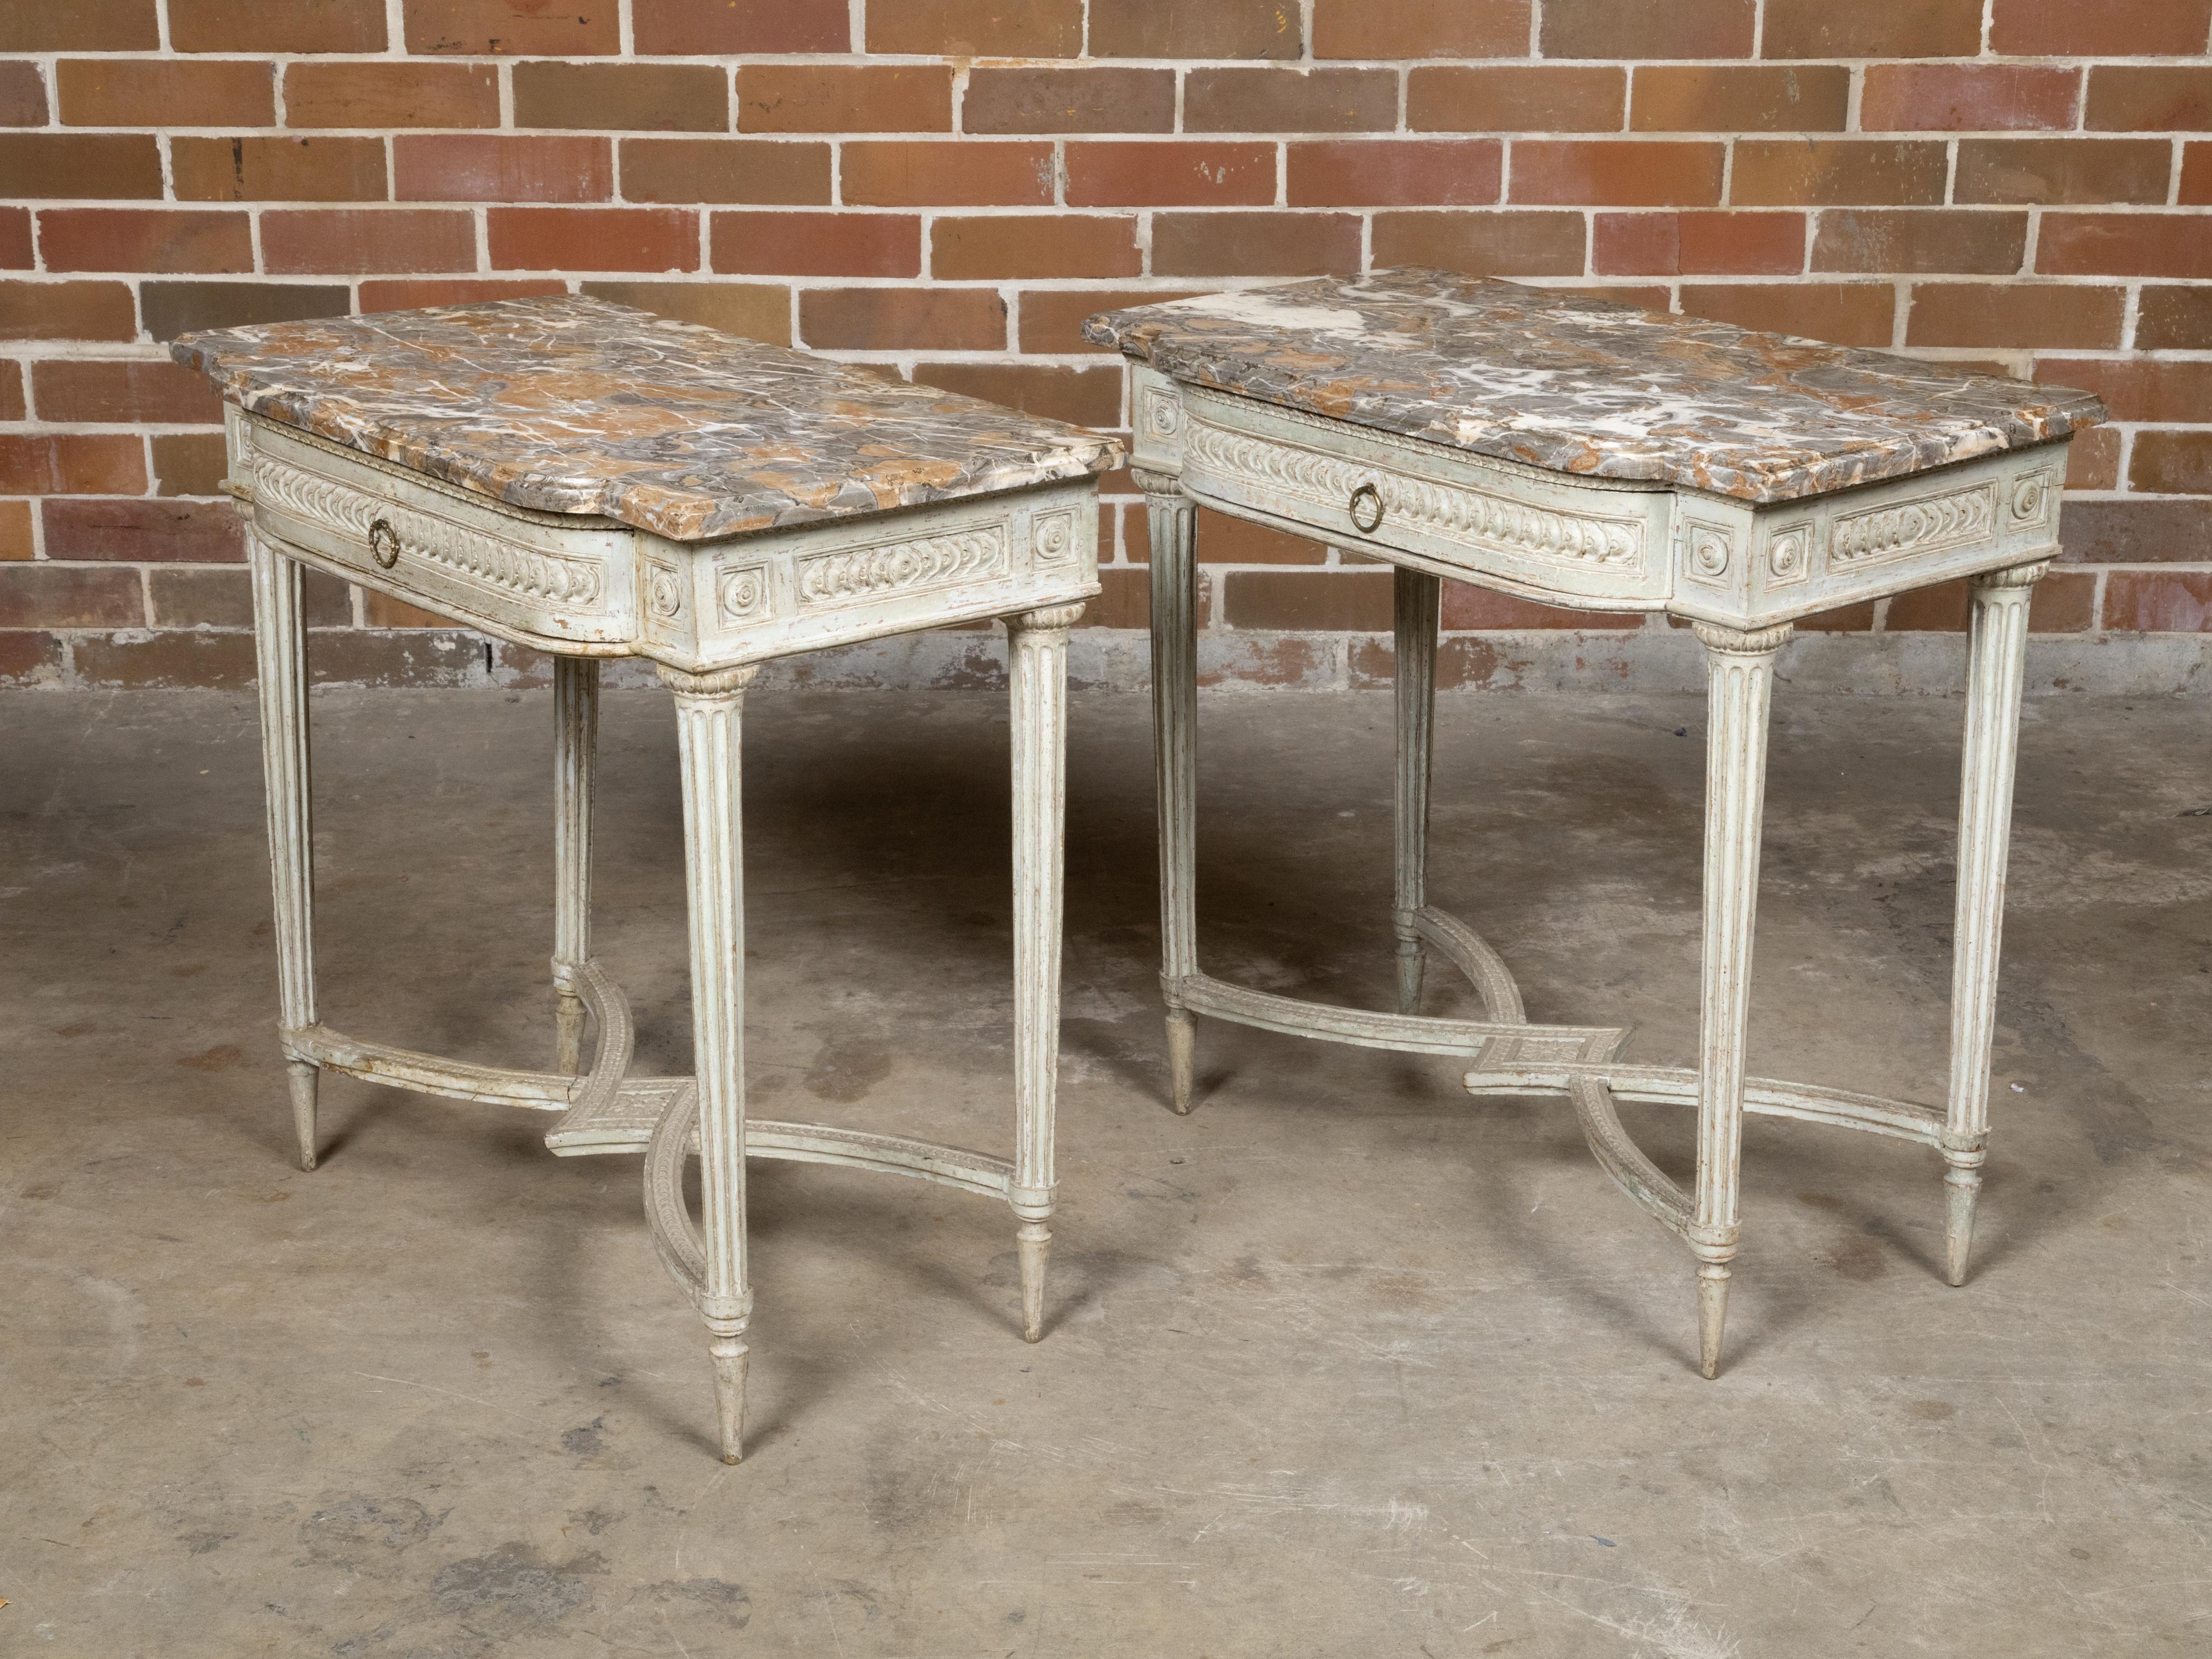 A pair of French Louis XVI period antique white painted console tables from the 18th century with marble tops, carved stacked coin style frieze and fluted legs. This pair of French Louis XVI period console tables, dating back to the 18th century,